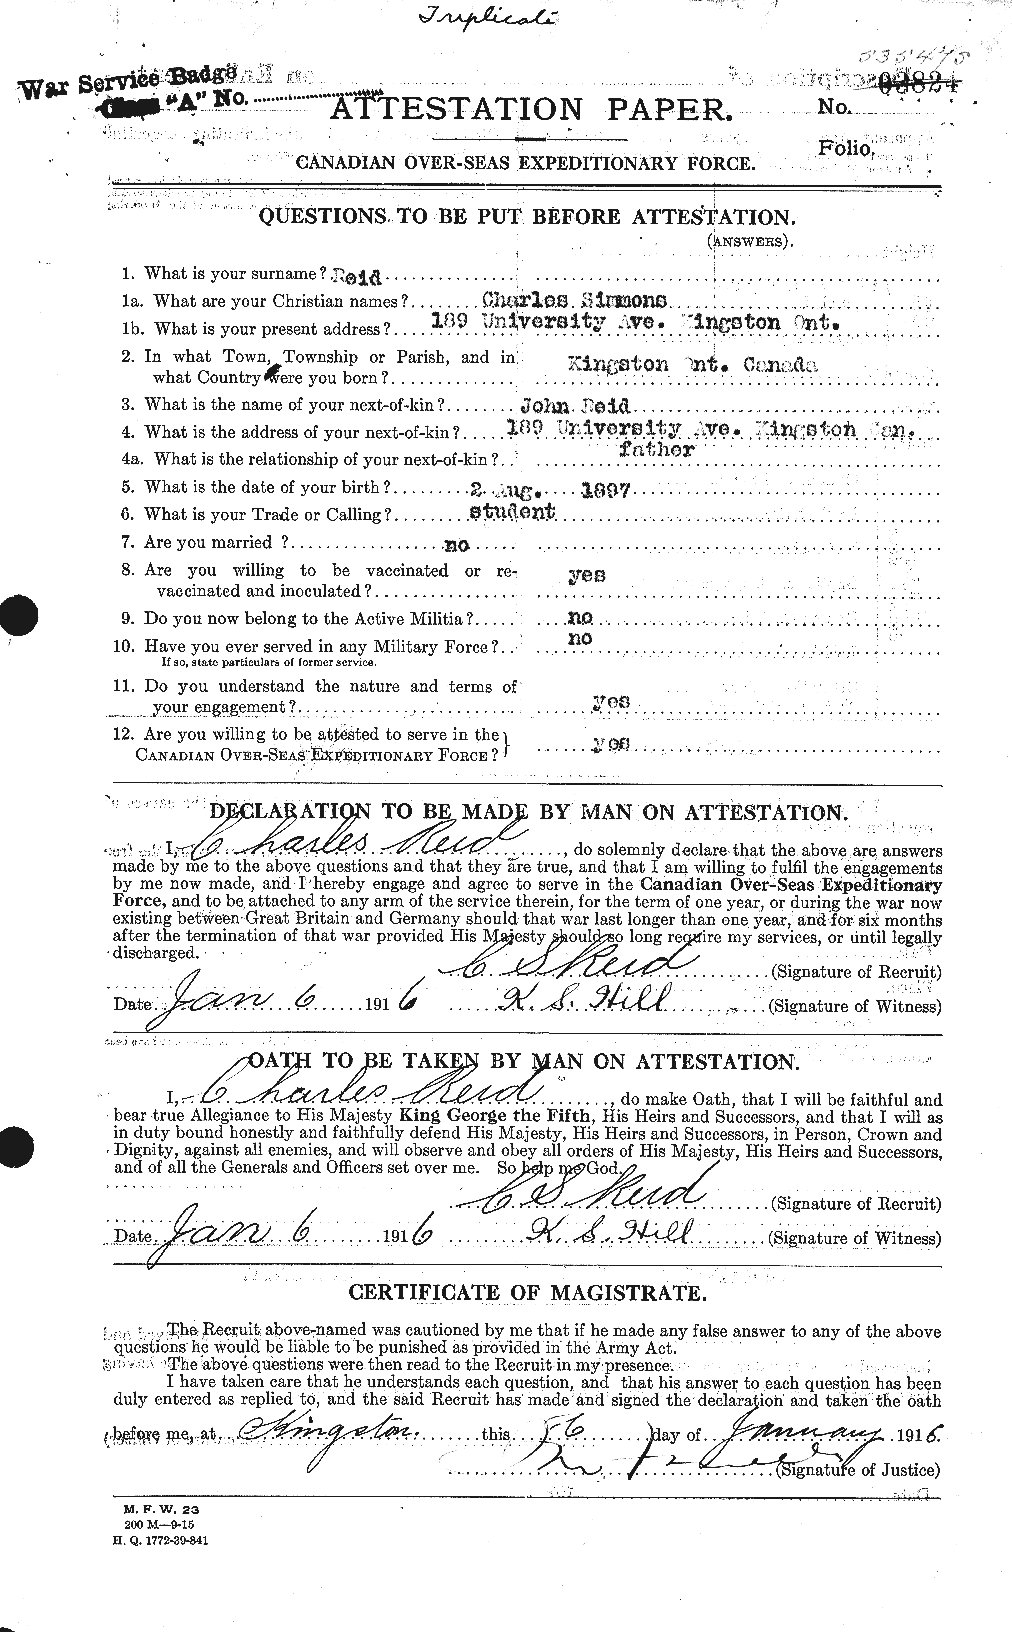 Personnel Records of the First World War - CEF 597898a